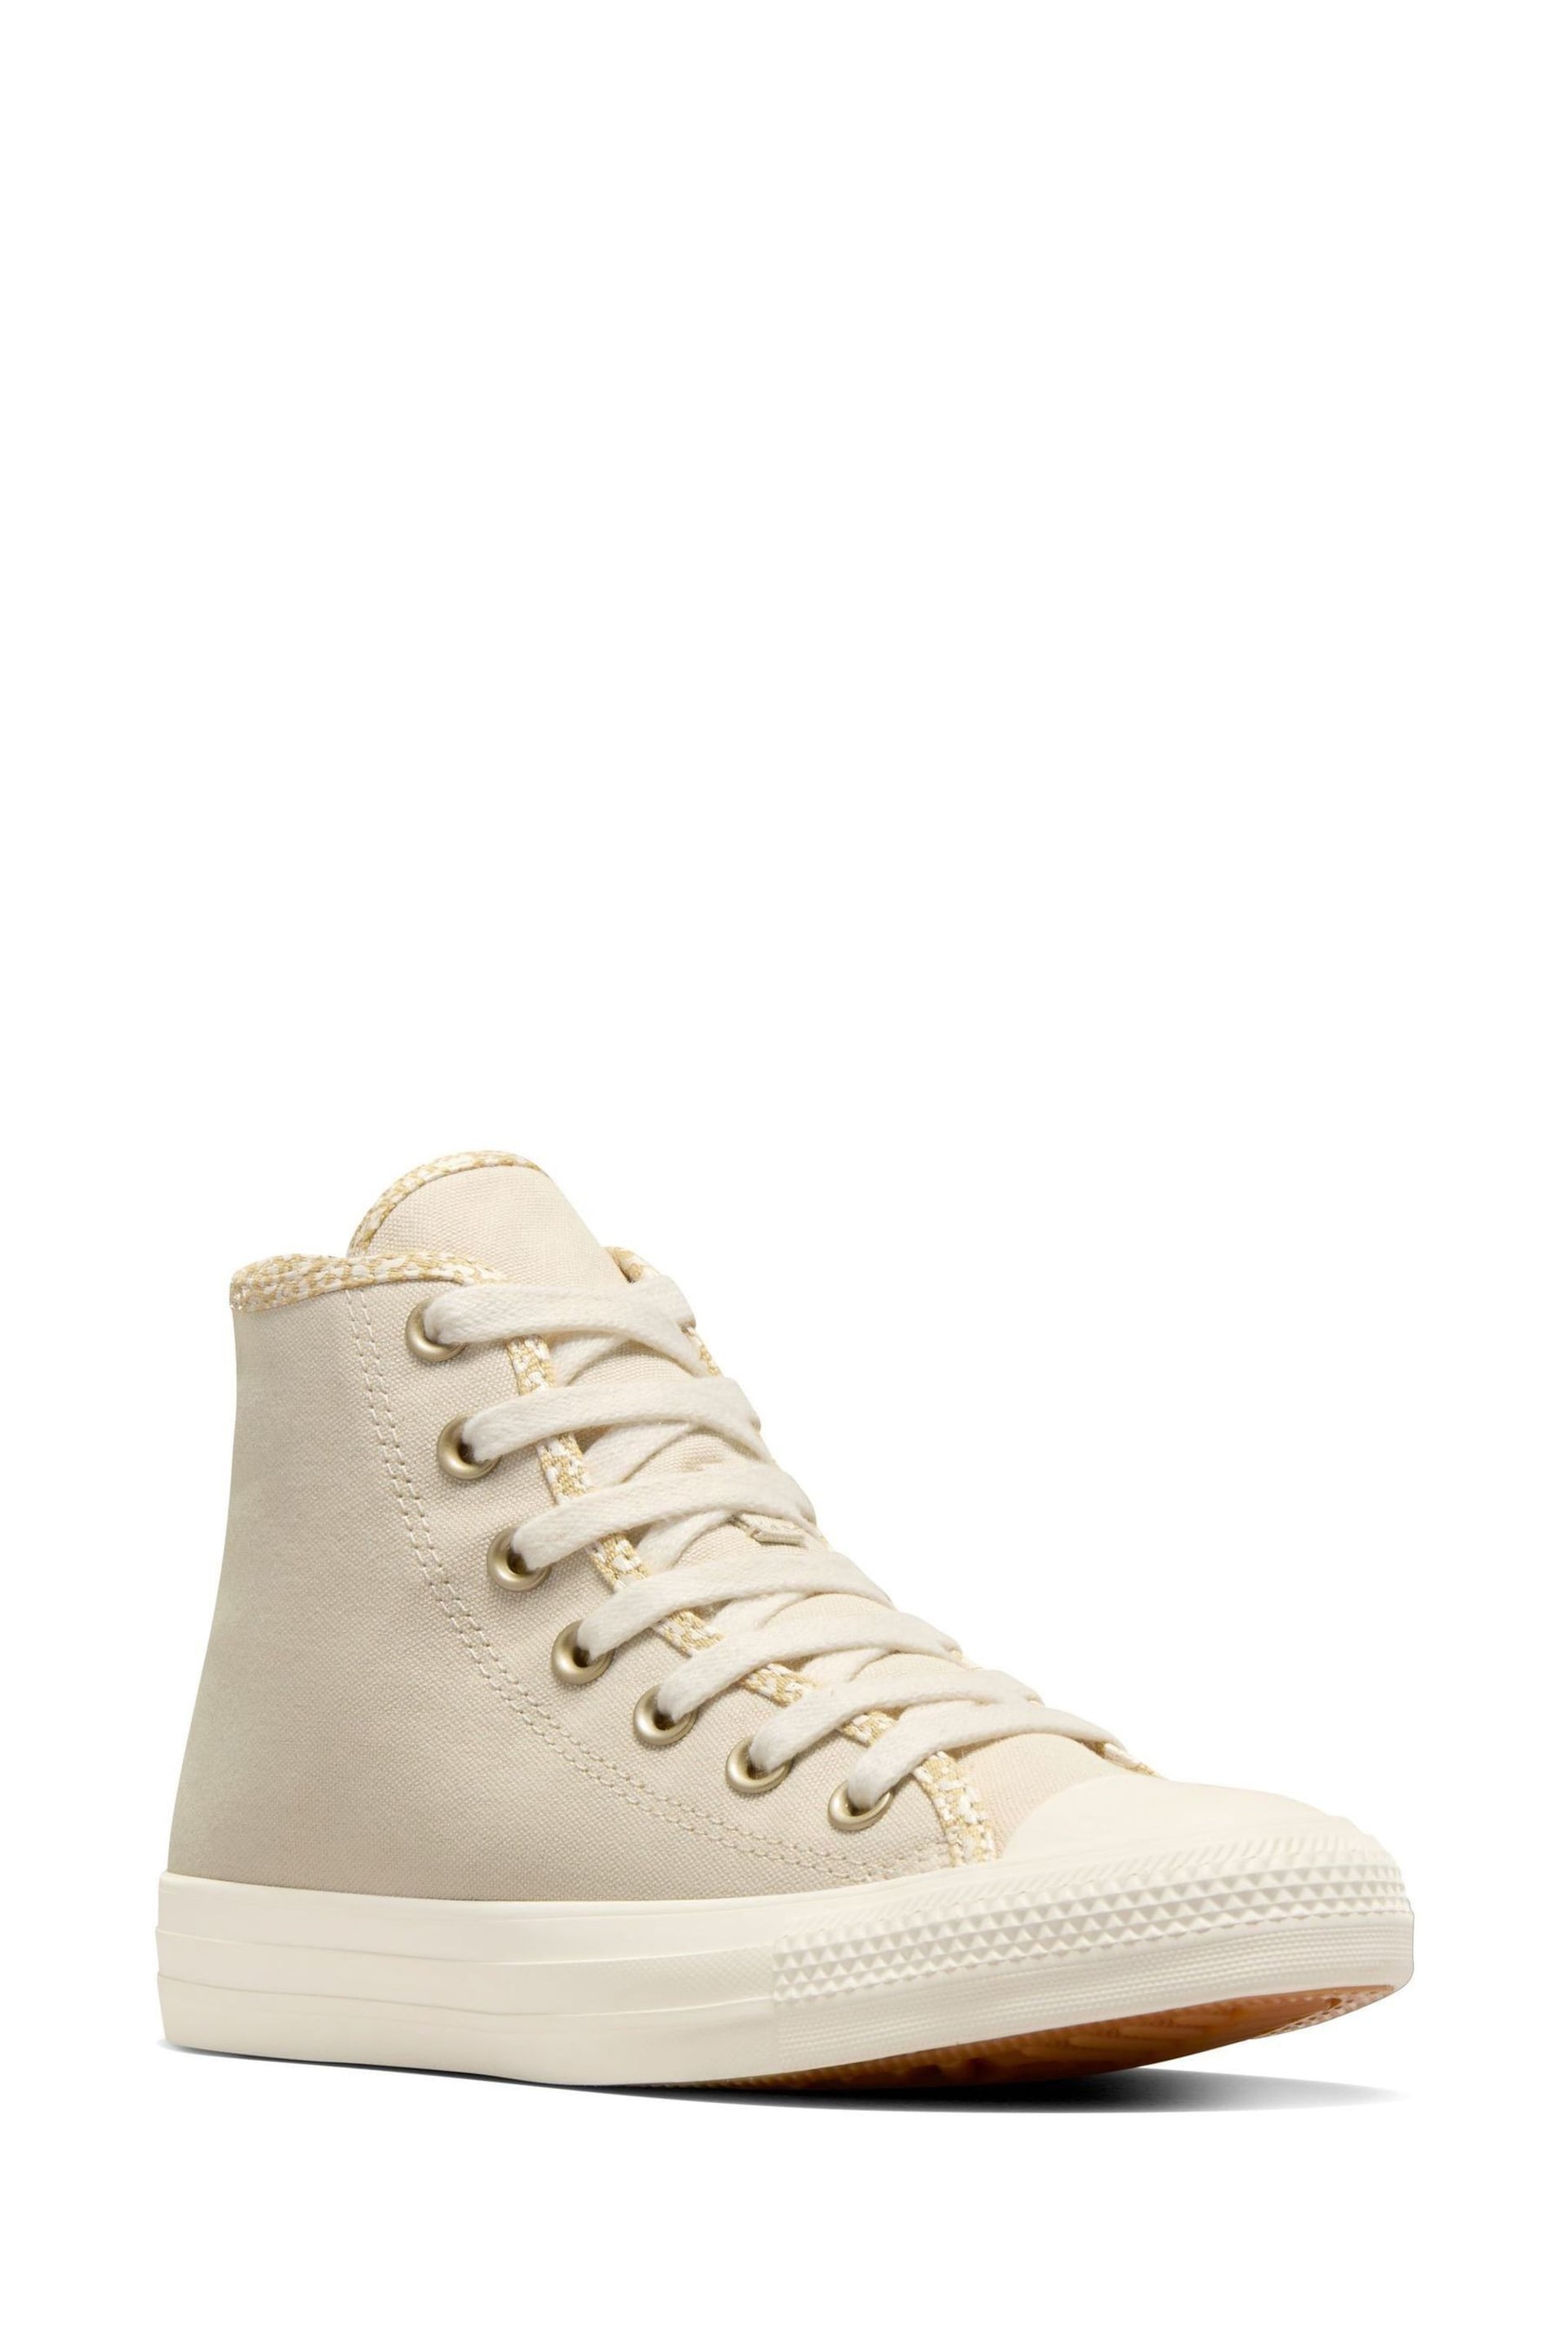 Converse Beige Chuck Taylor All Star High Top Trainers - Image 11 of 12